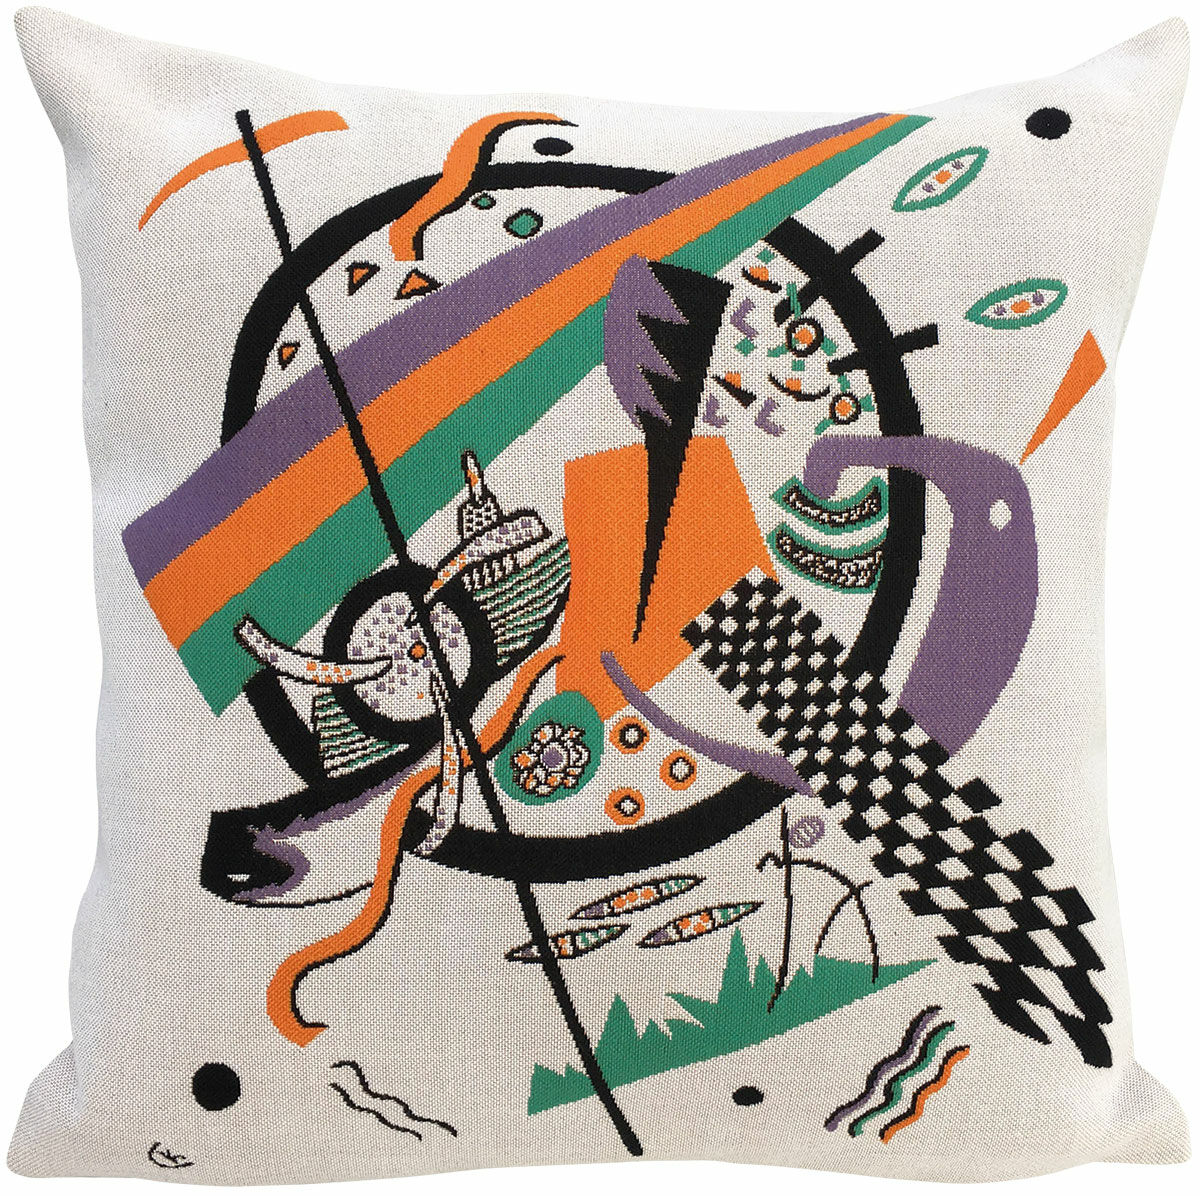 Cushion cover "Small Worlds VI" by Wassily Kandinsky